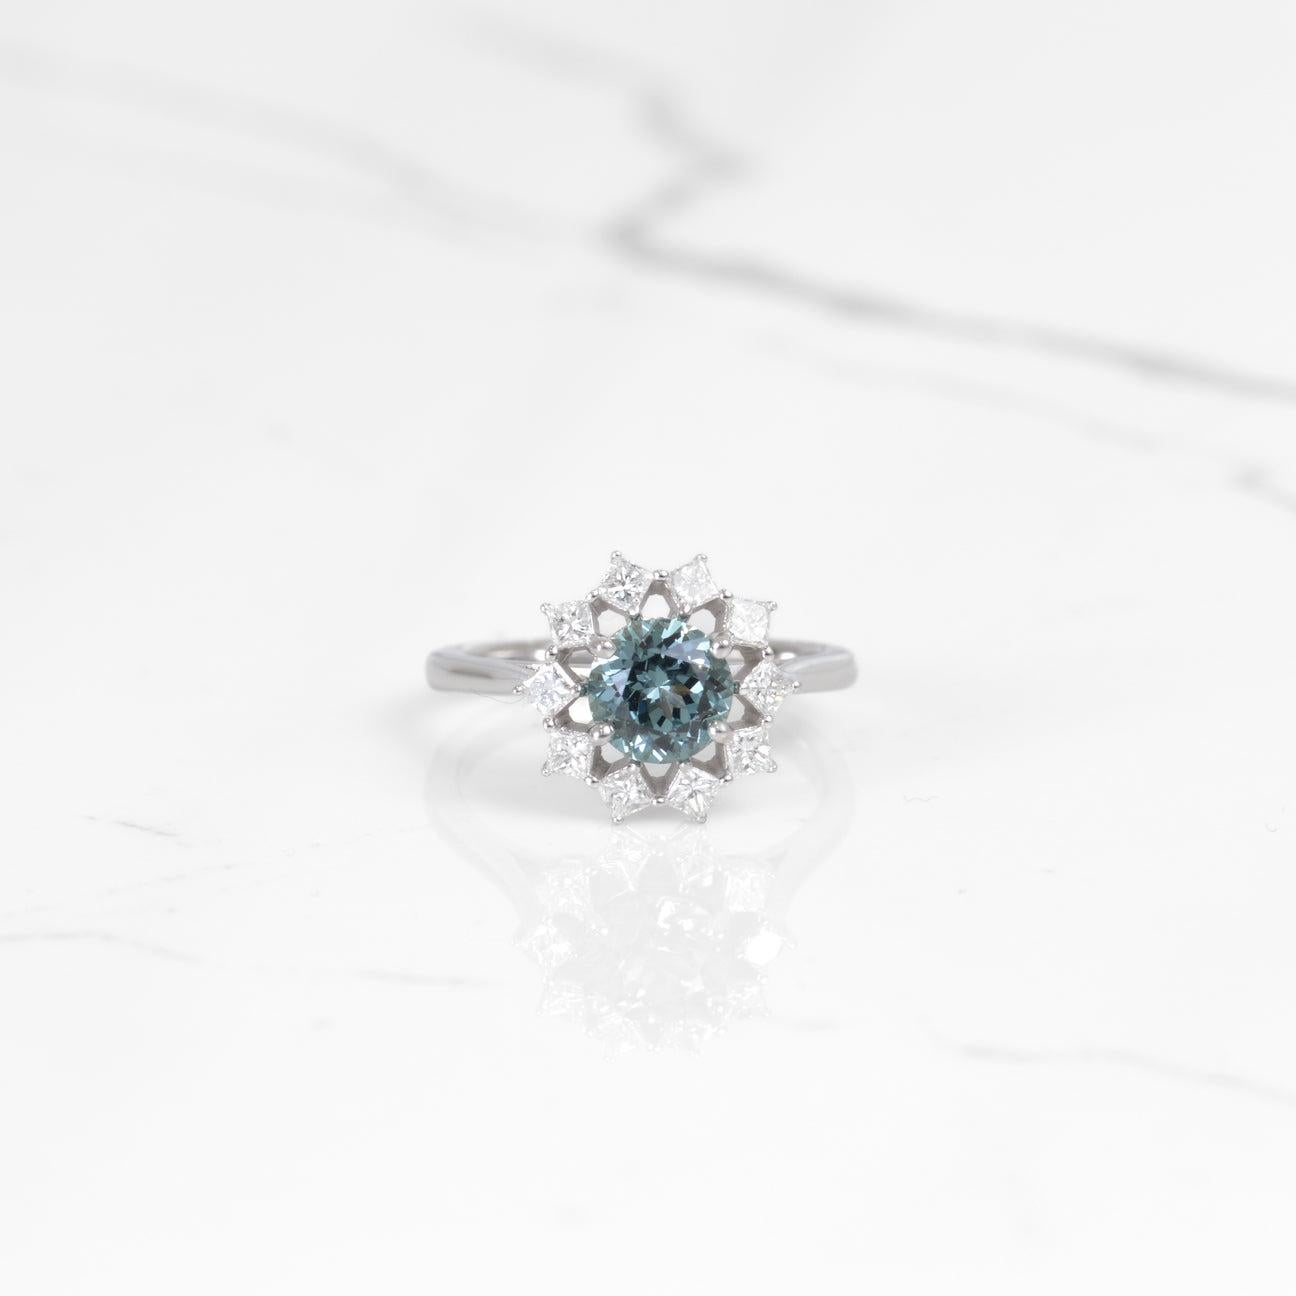 This gorgeous ring is nothing but unique! The center is a beautiful Montana sapphire that is 1.45 carats, and it truly glistens! Surrounding the sapphire is a stunning princess cut diamond halo that is a total of .57 carats. All set in 14k white